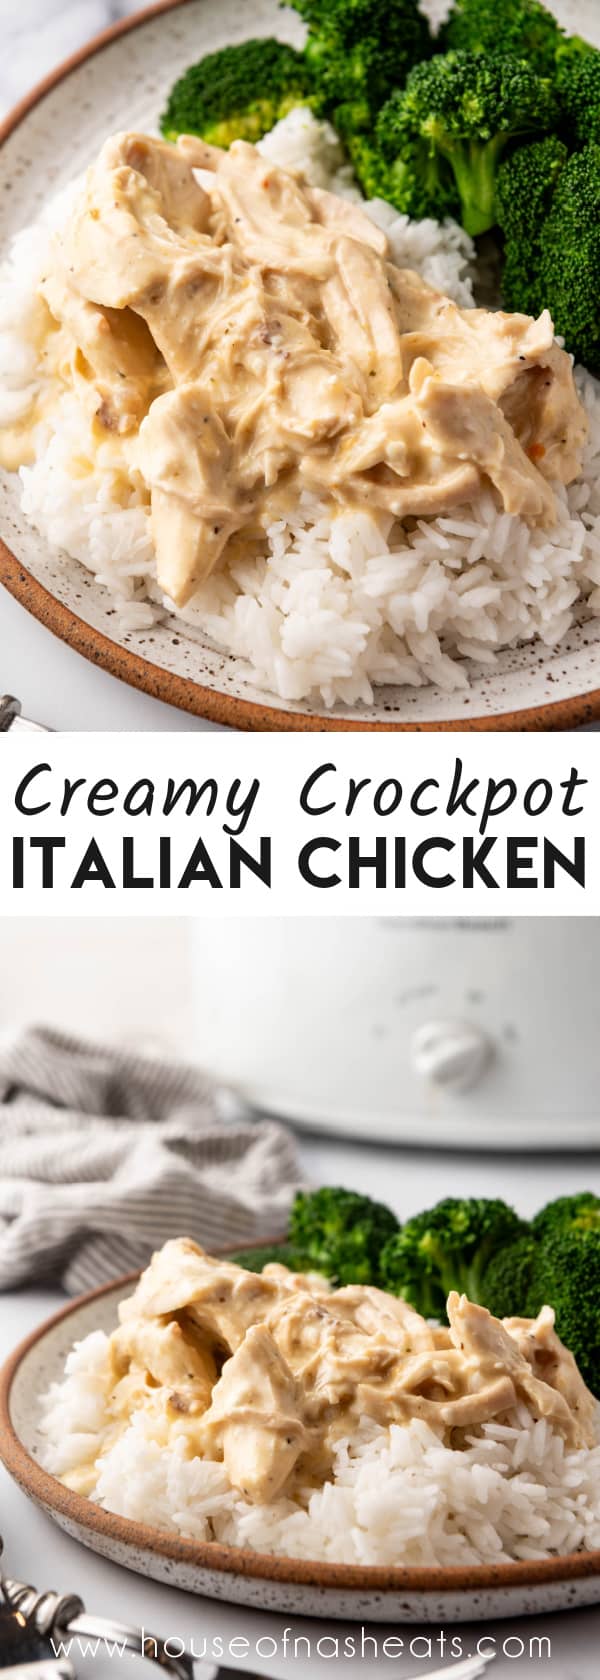 A collage of images of crockpot Italian chicken with text overlay.